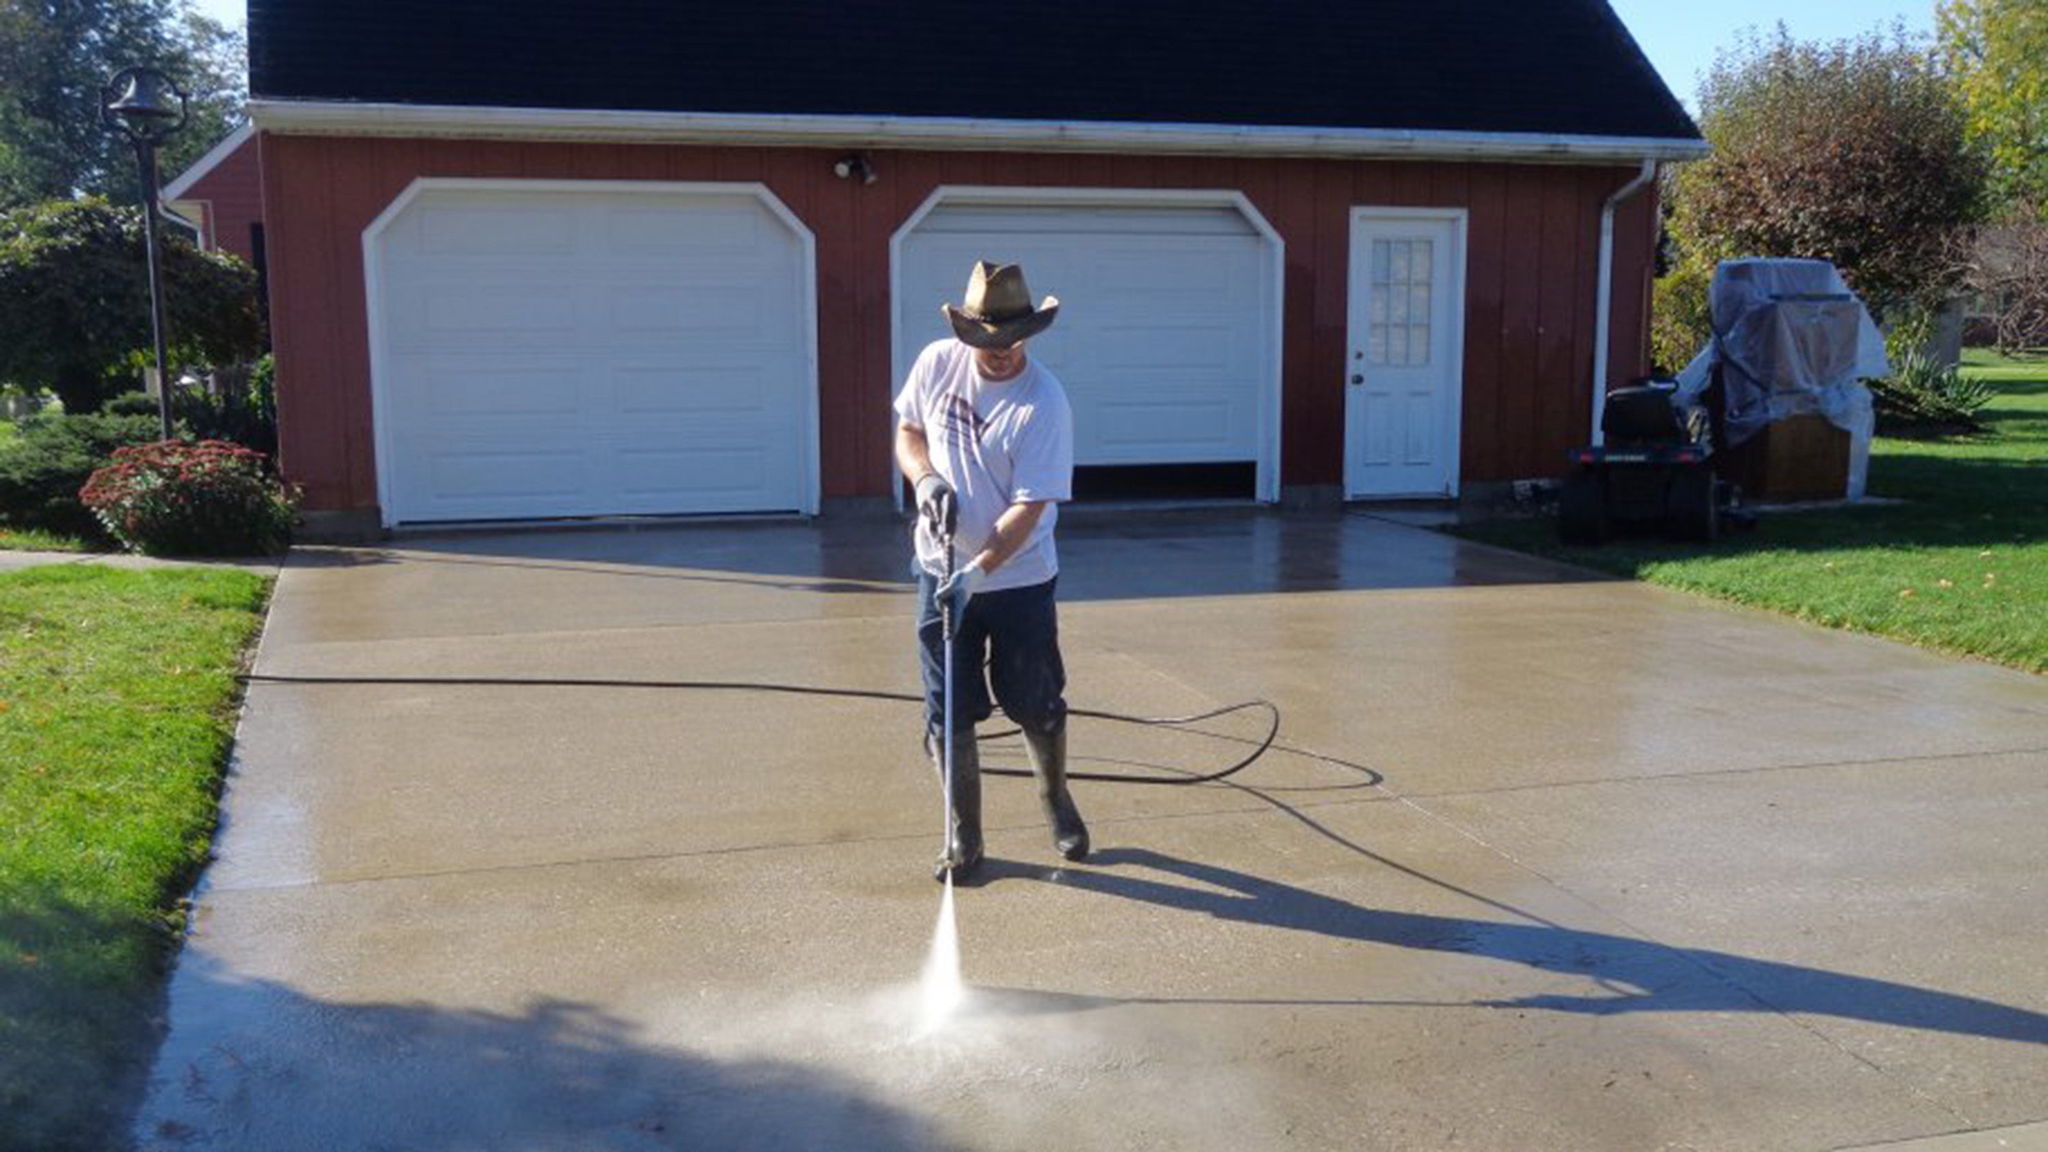 Pressure washing a driveway is an easy way to get it clean. It also works great for garage doors and more.